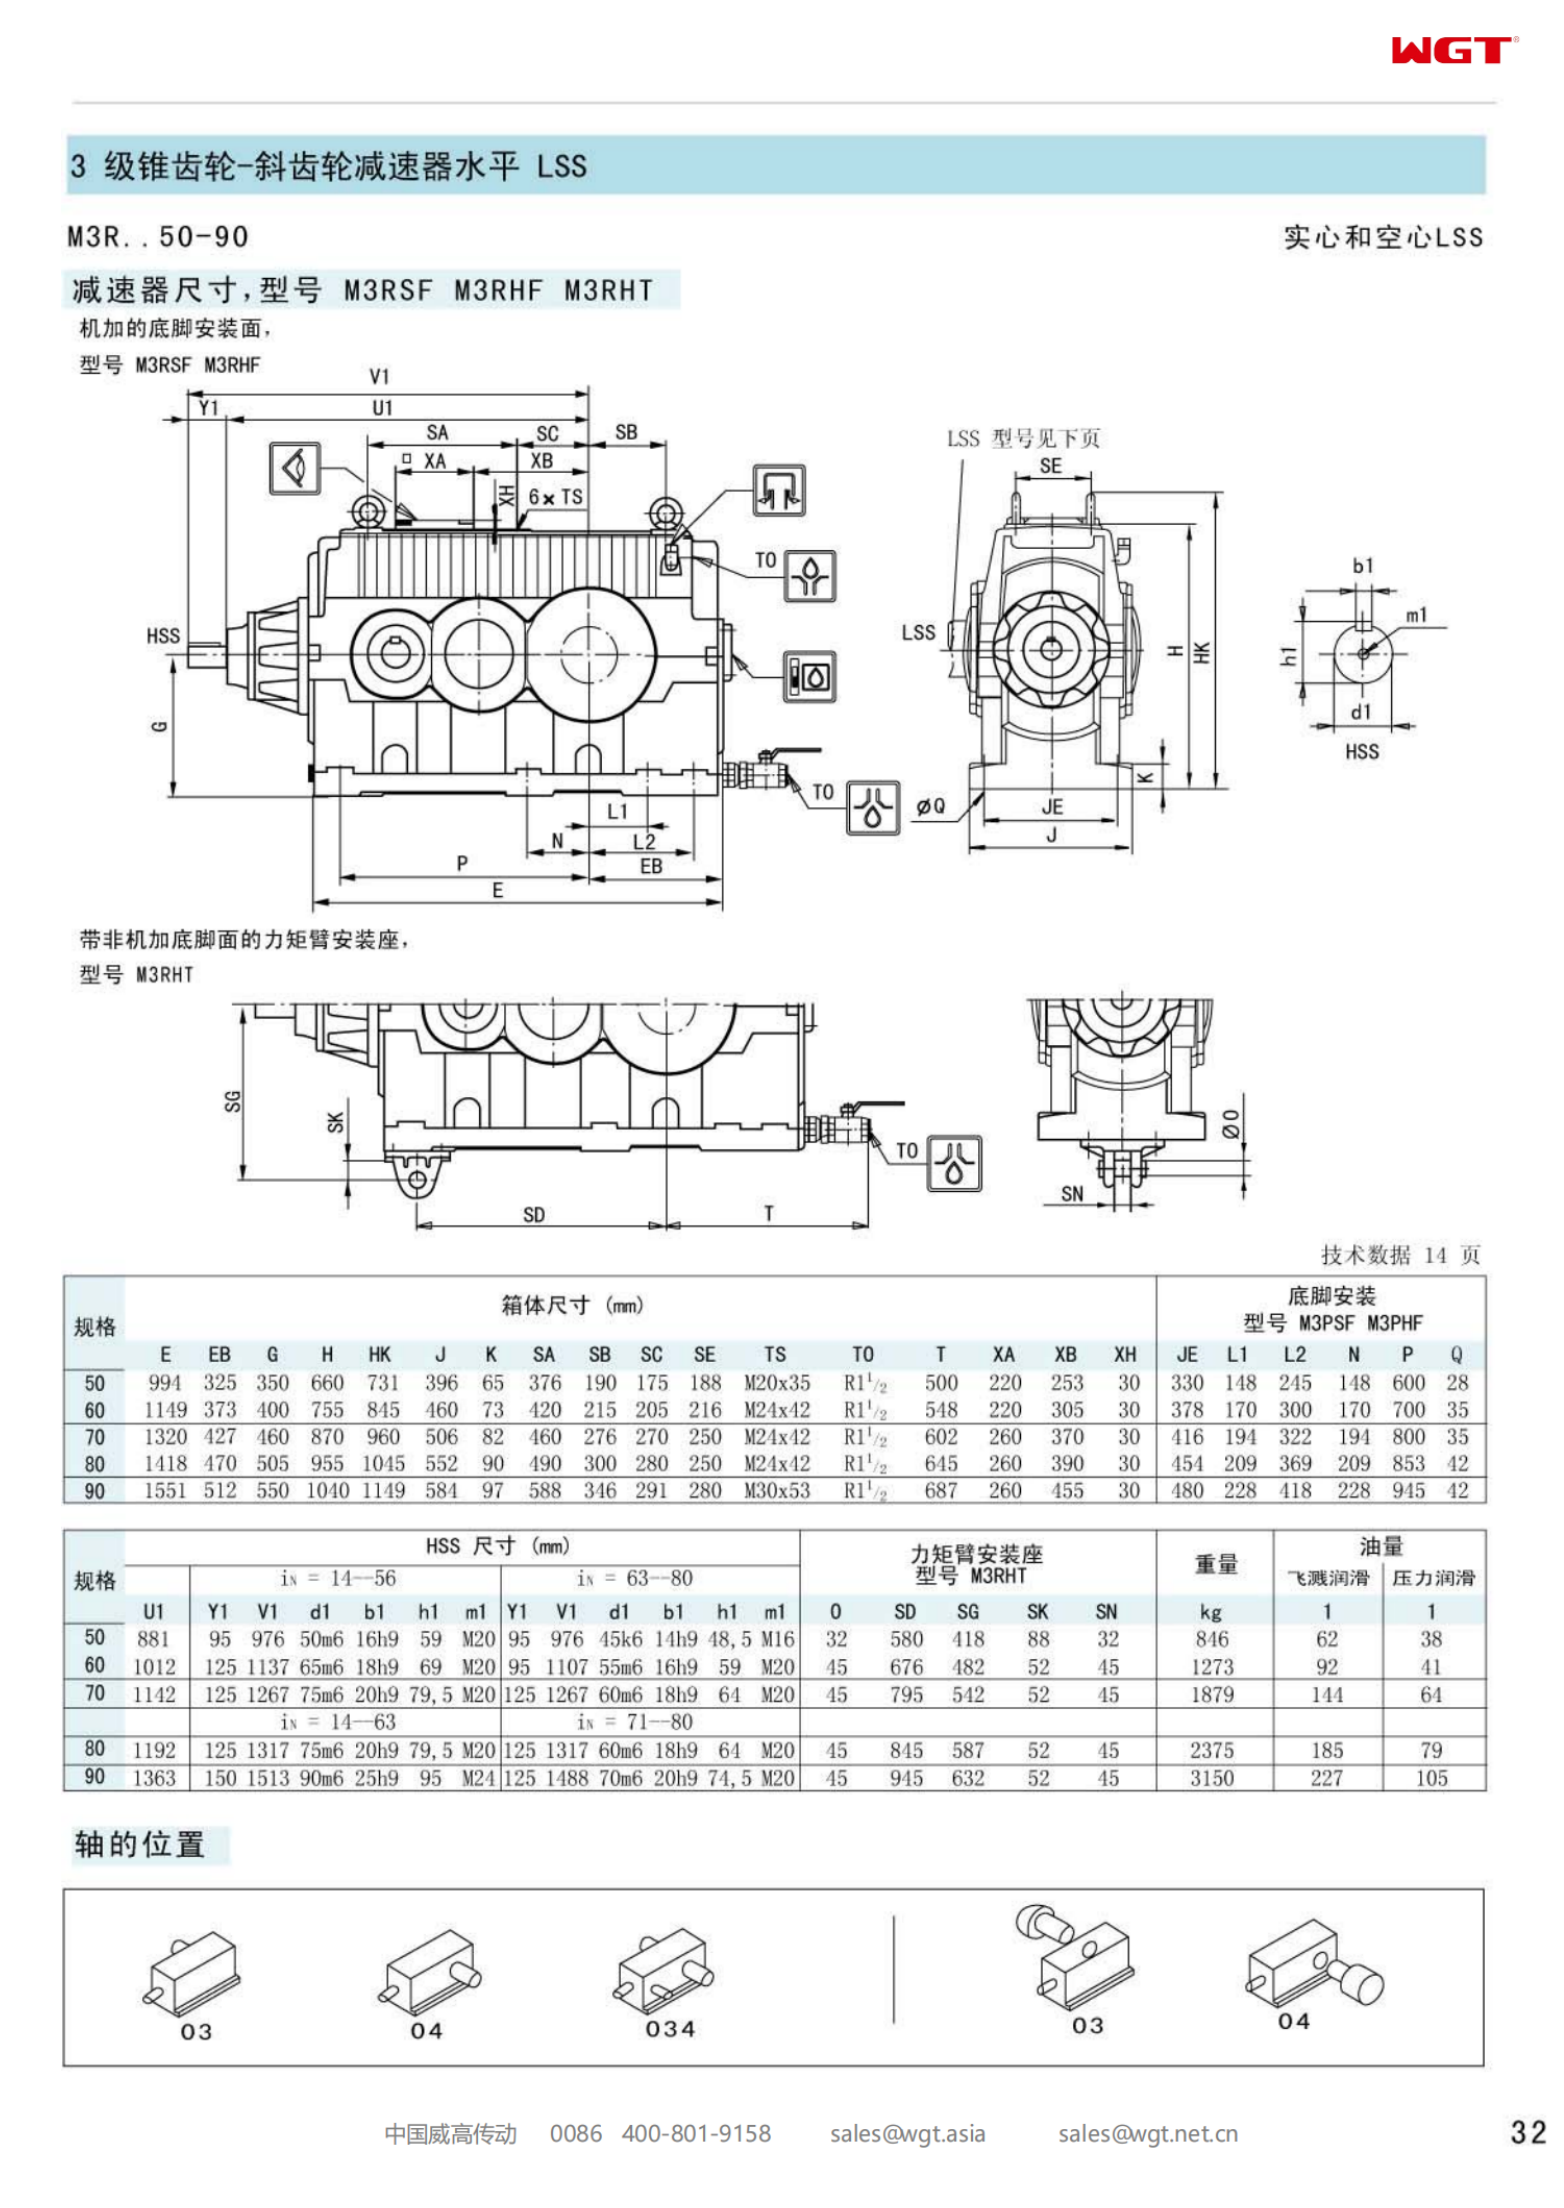 M3RSF90 Replace_SEW_M_Series Gearbox